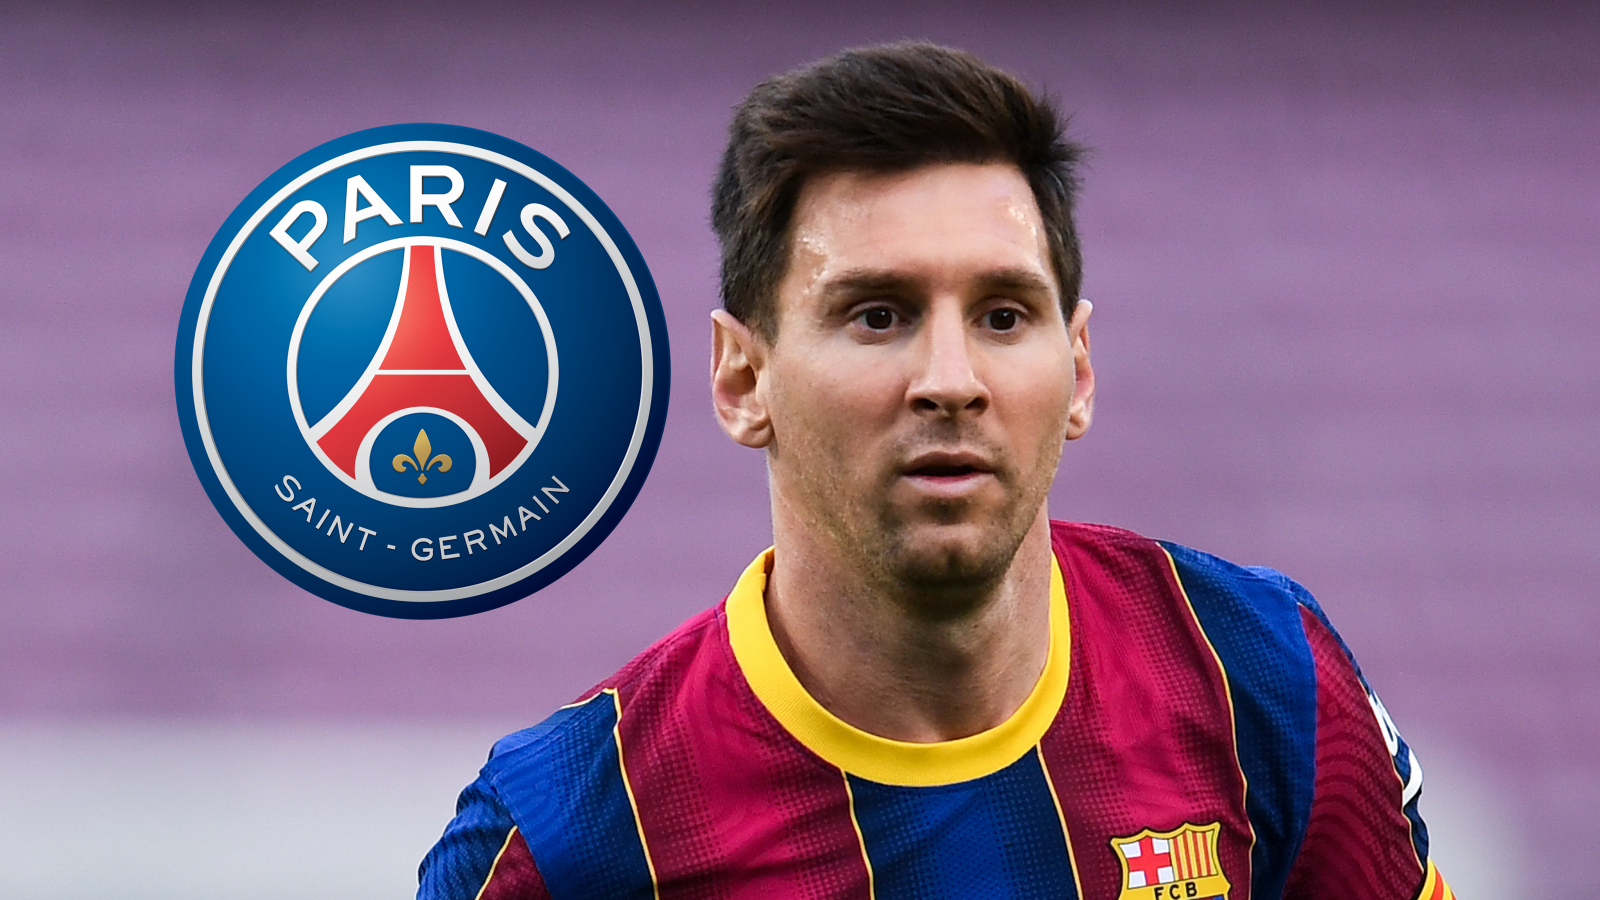 Messi joins PSG on free transfer following emotional Barcelona departure